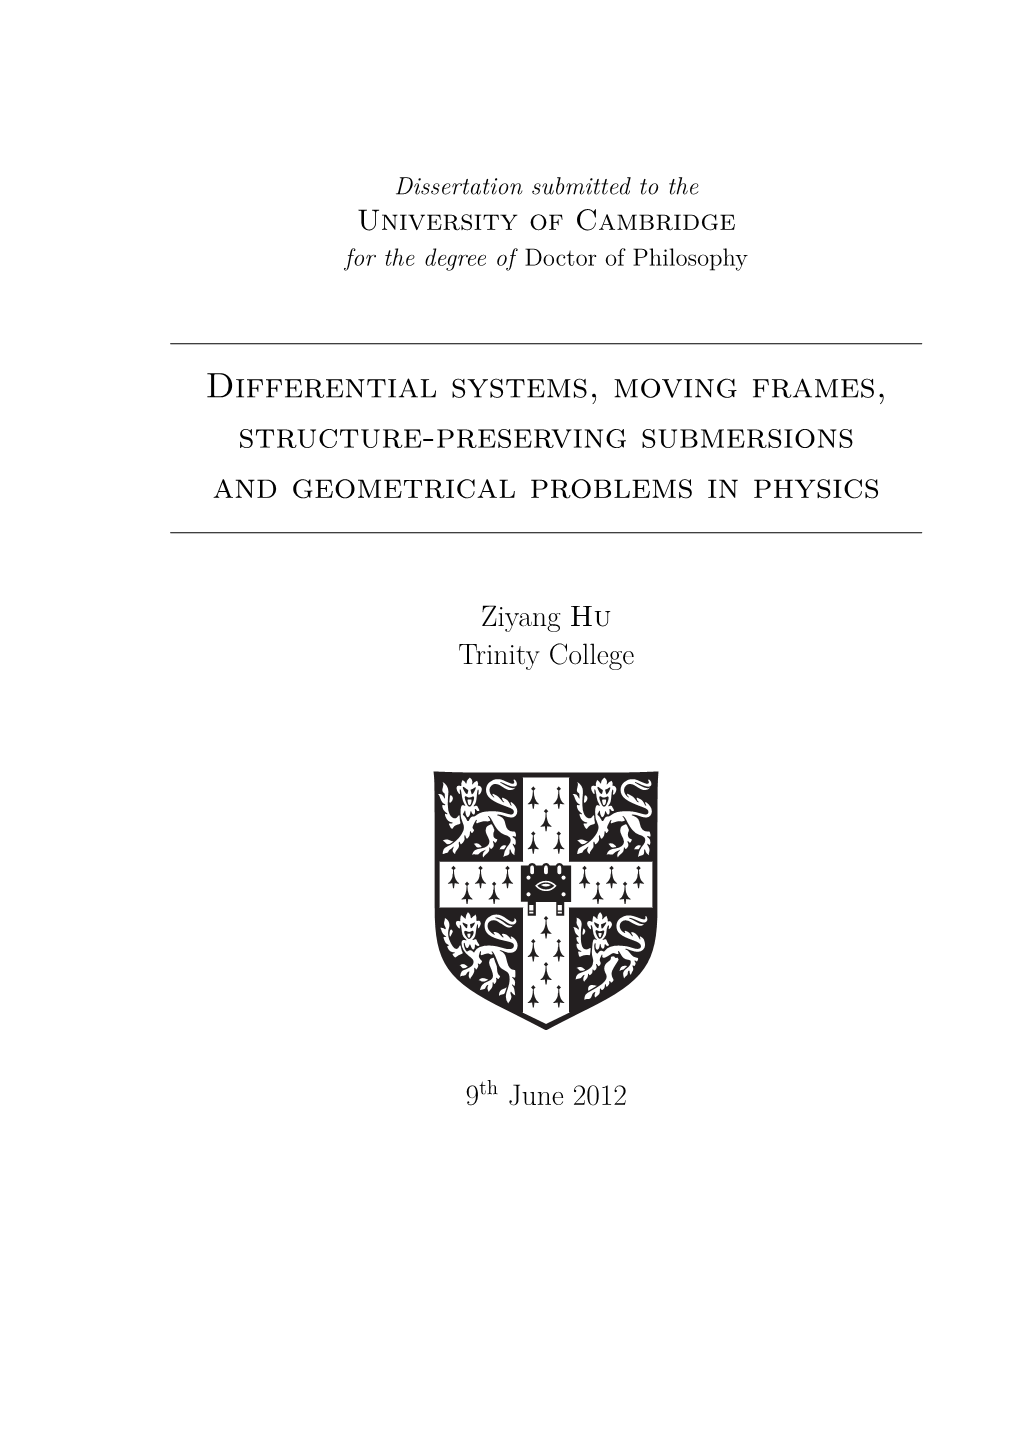 Differential Systems, Moving Frames, Structure-Preserving Submersions and Geometrical Problems in Physics